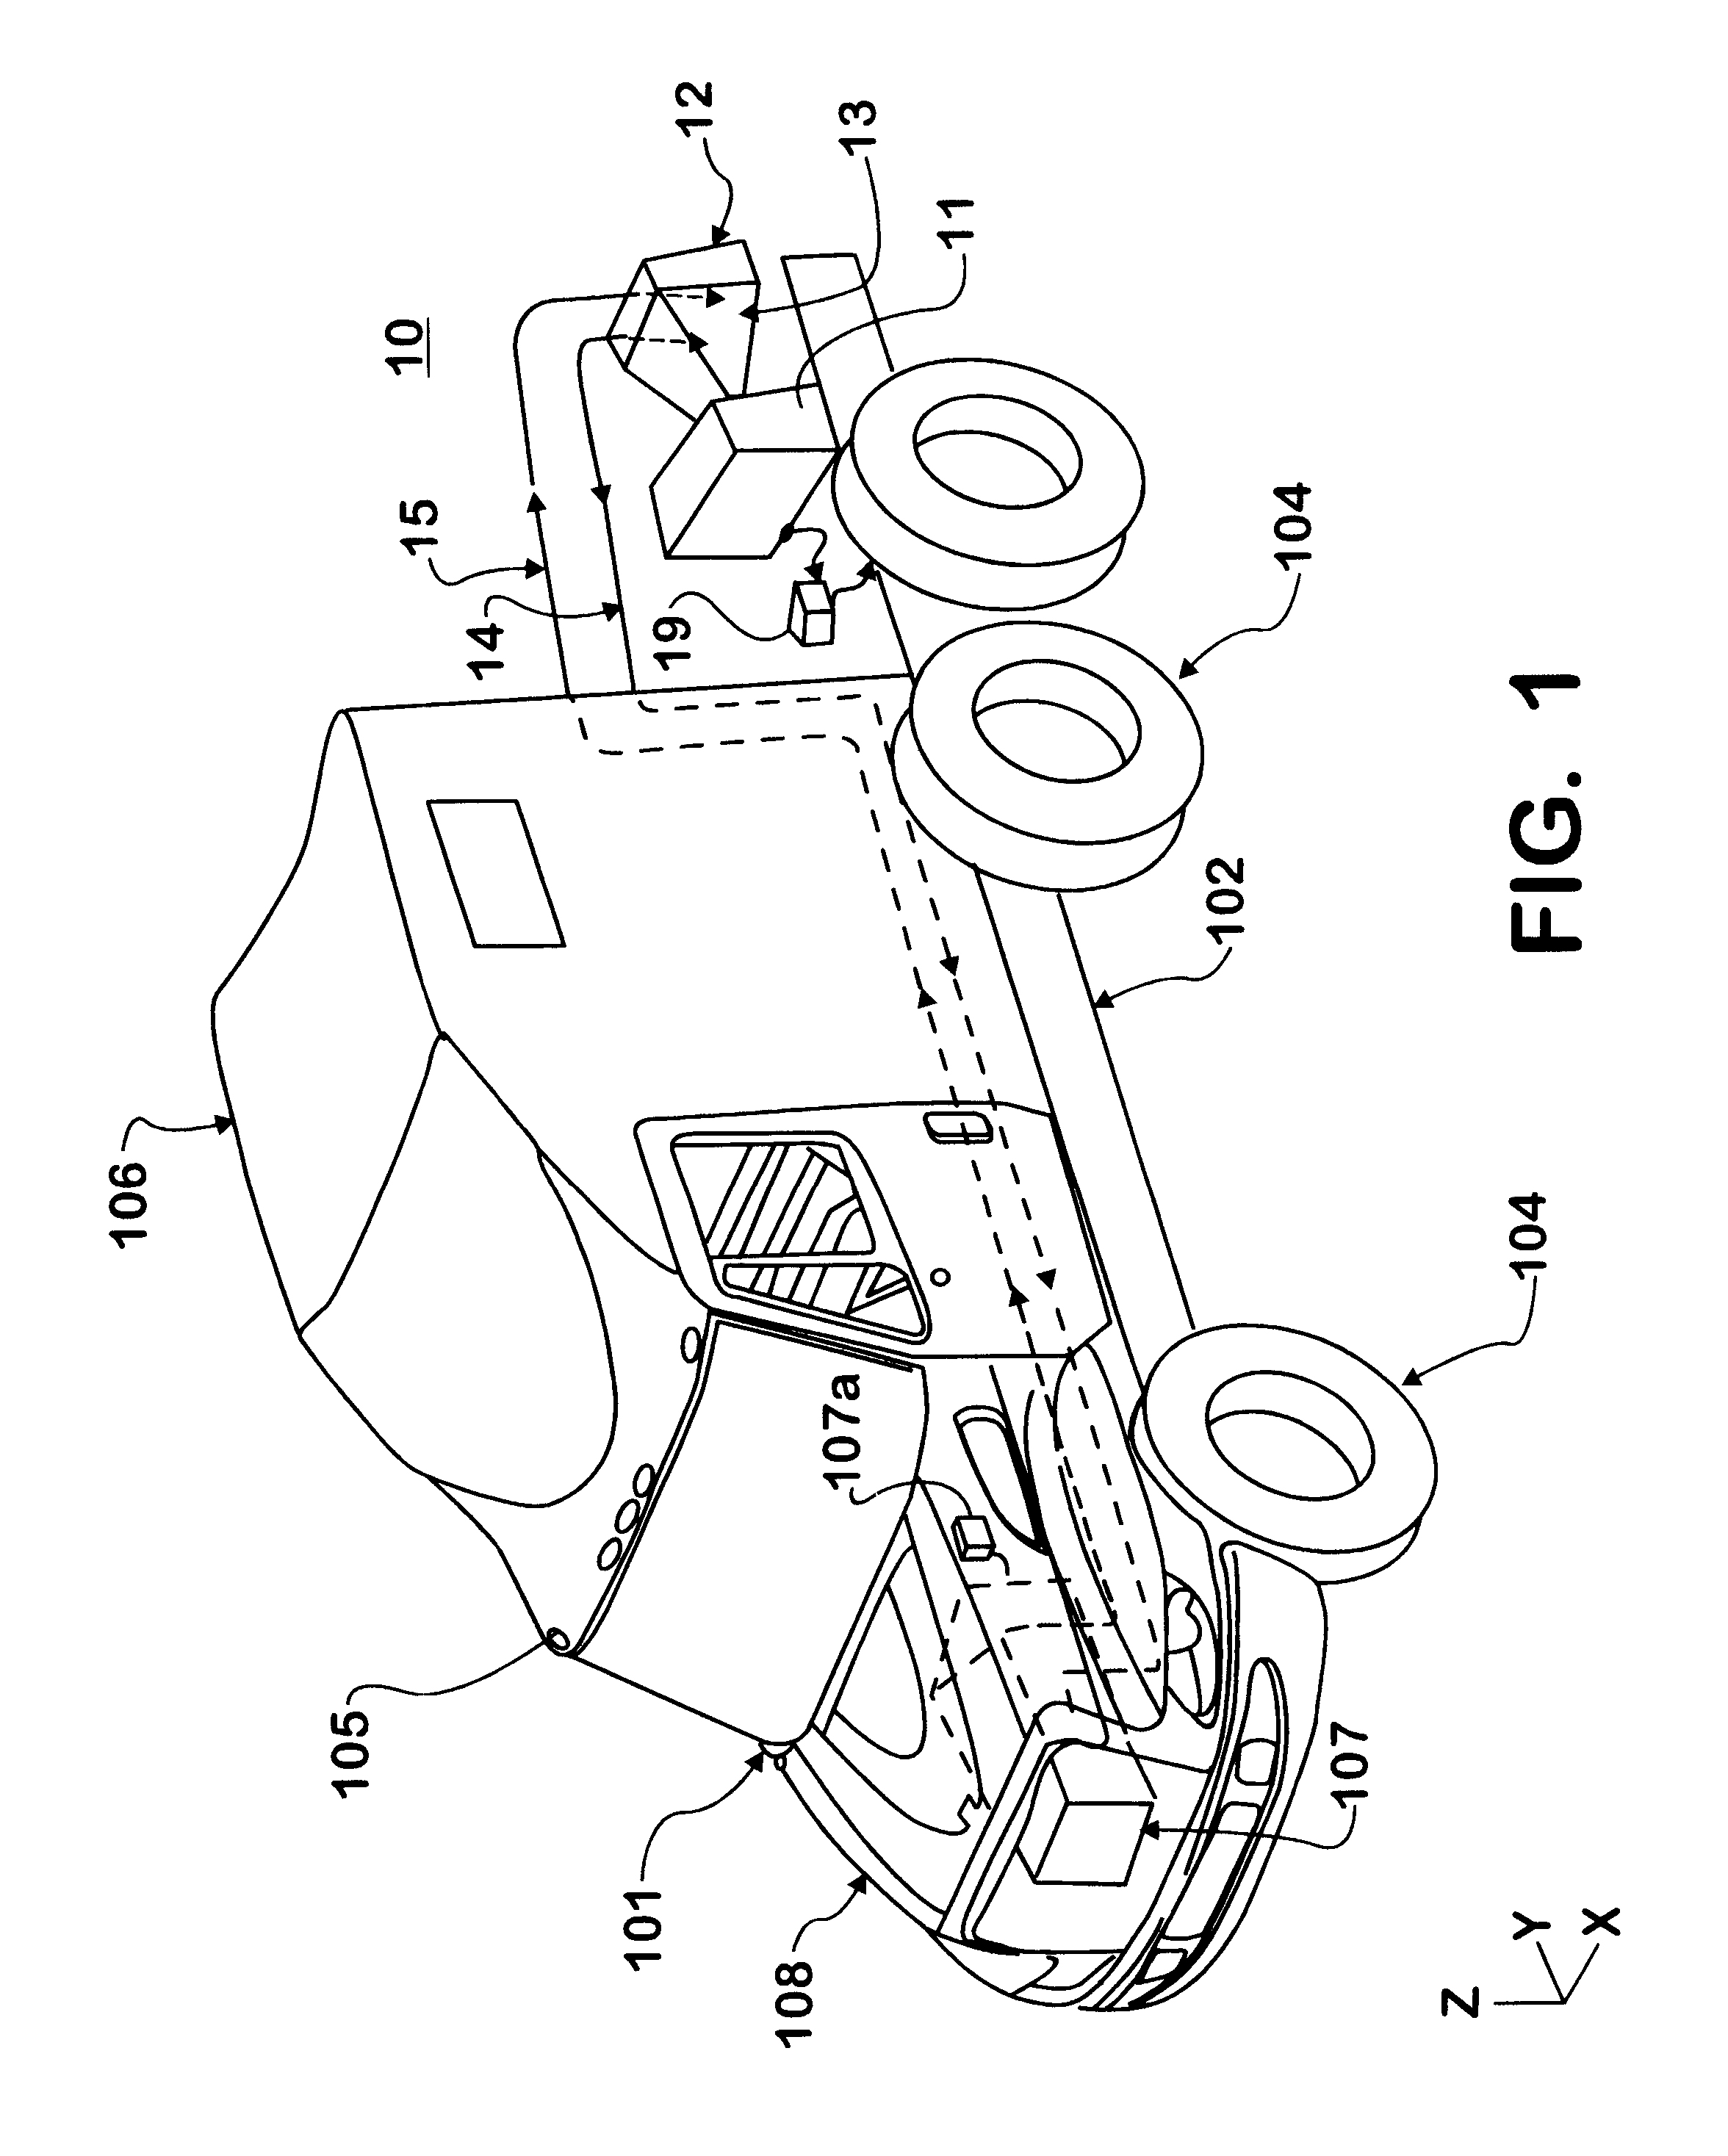 Vehicle engine cooling system without a fan